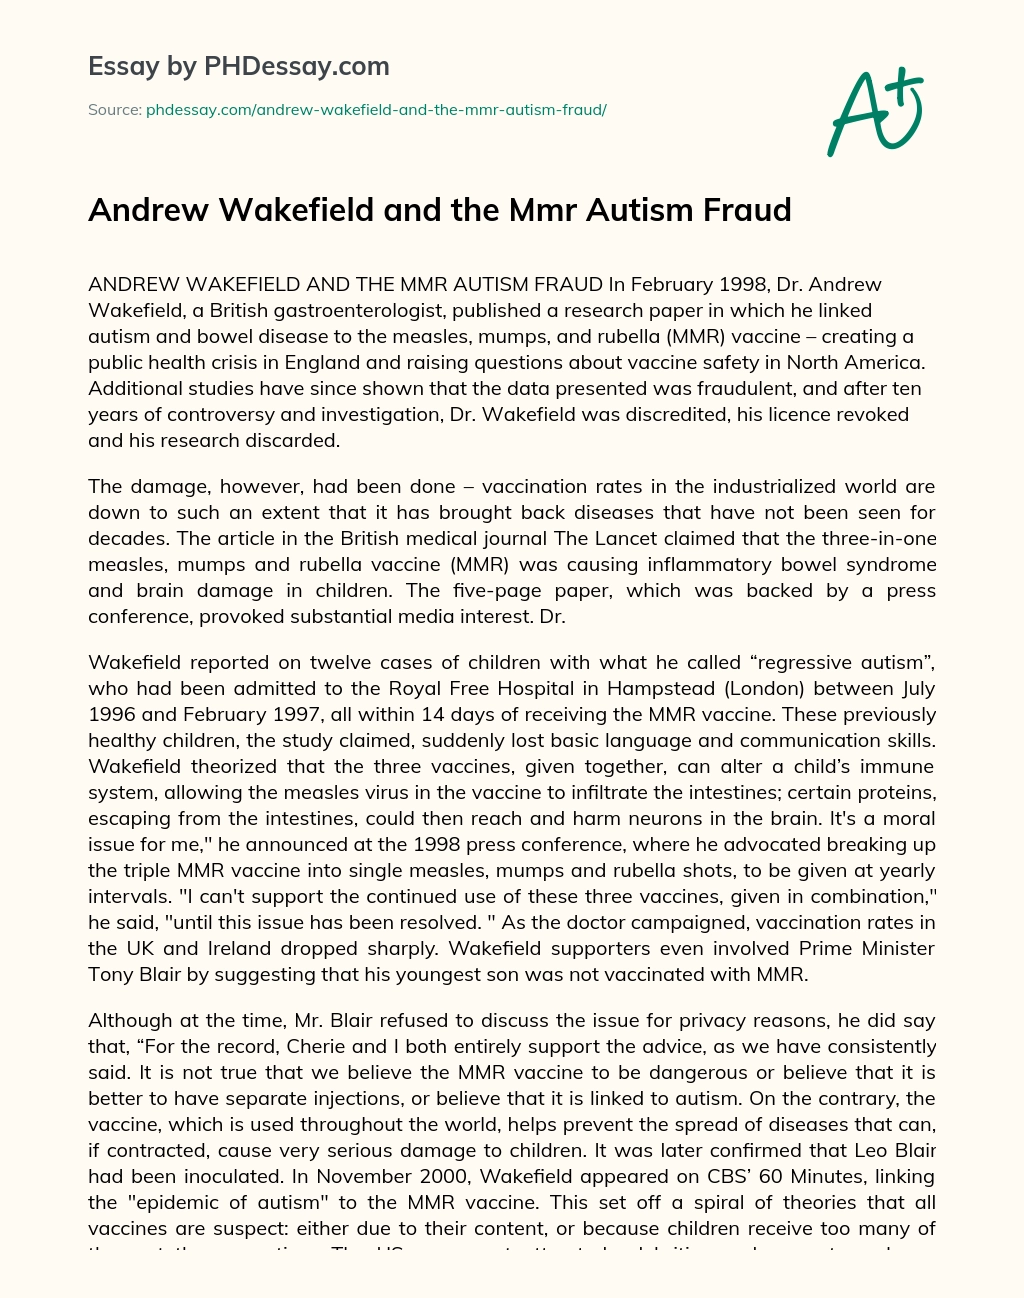 Andrew Wakefield and the Mmr Autism Fraud essay